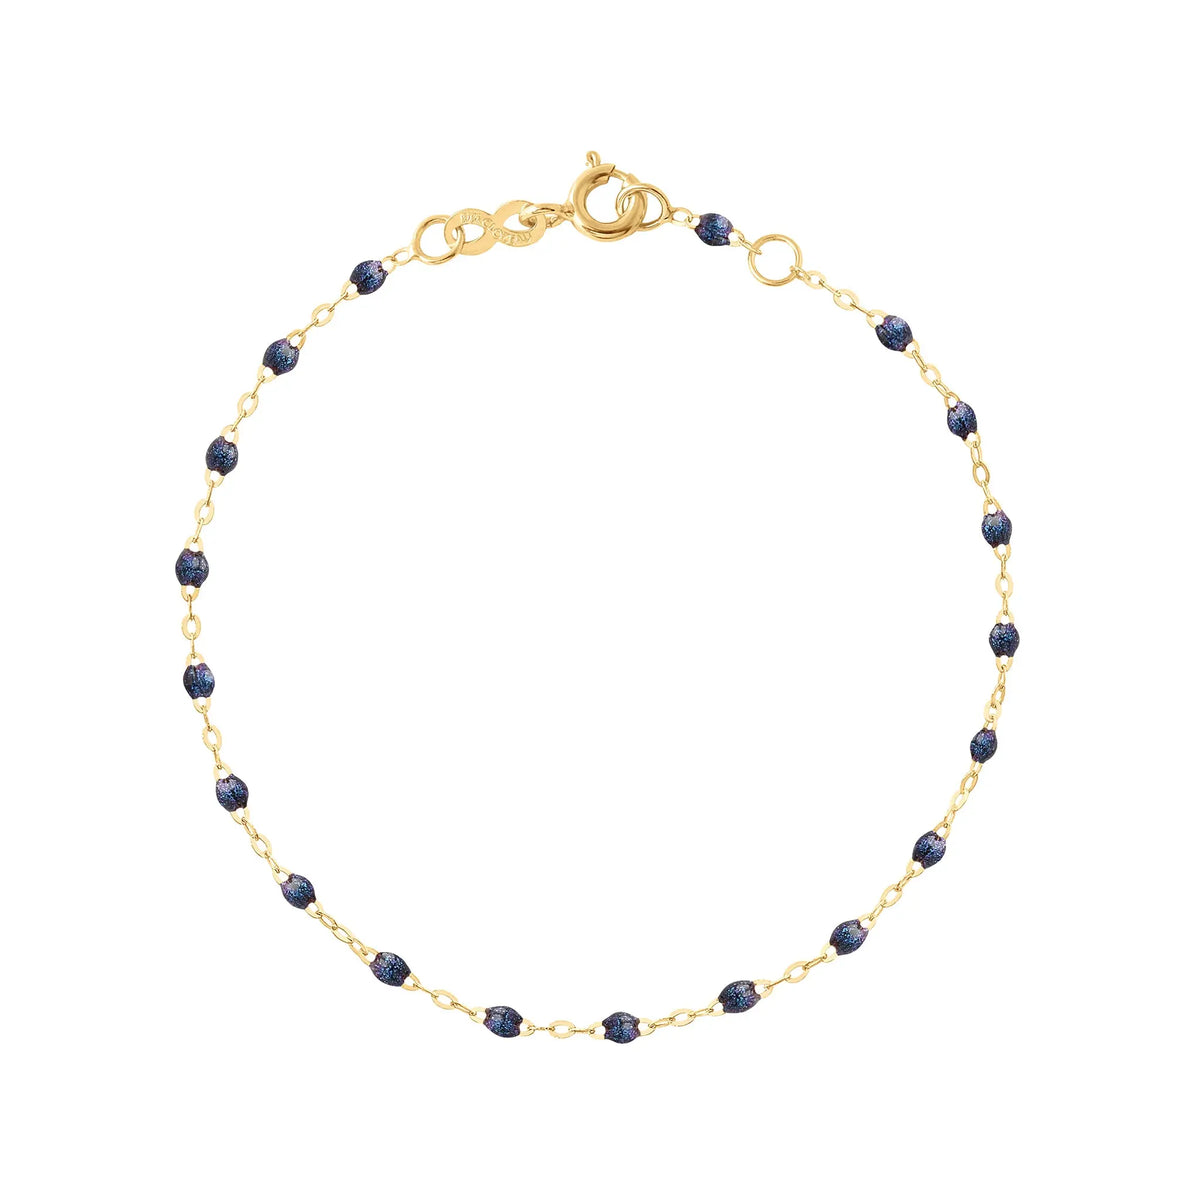 The Classic Gigi bracelet by gigi CLOZEAU features 18K Yellow Gold, and unique Midnight jewels for a simple, everyday look.   Each jewel is unique, artisanally made in their family-owned workshop. 18K yellow gold and resin. The bracelet measures 6.7 inches with adjustable clasp at 6.3 inches.